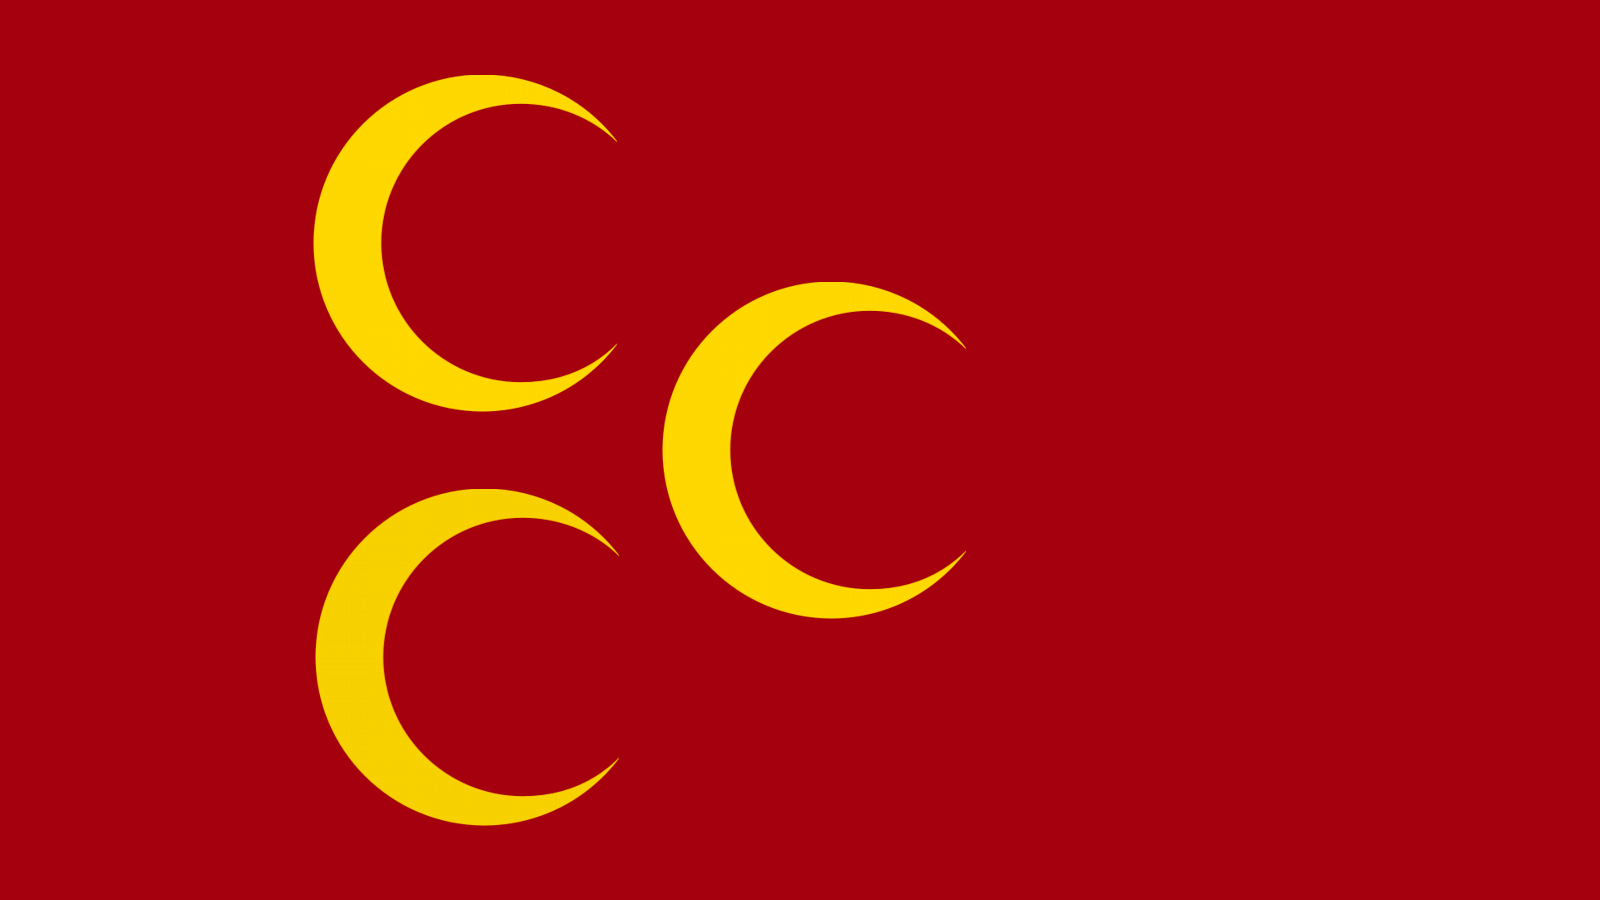 Historical flags of the Turkic States